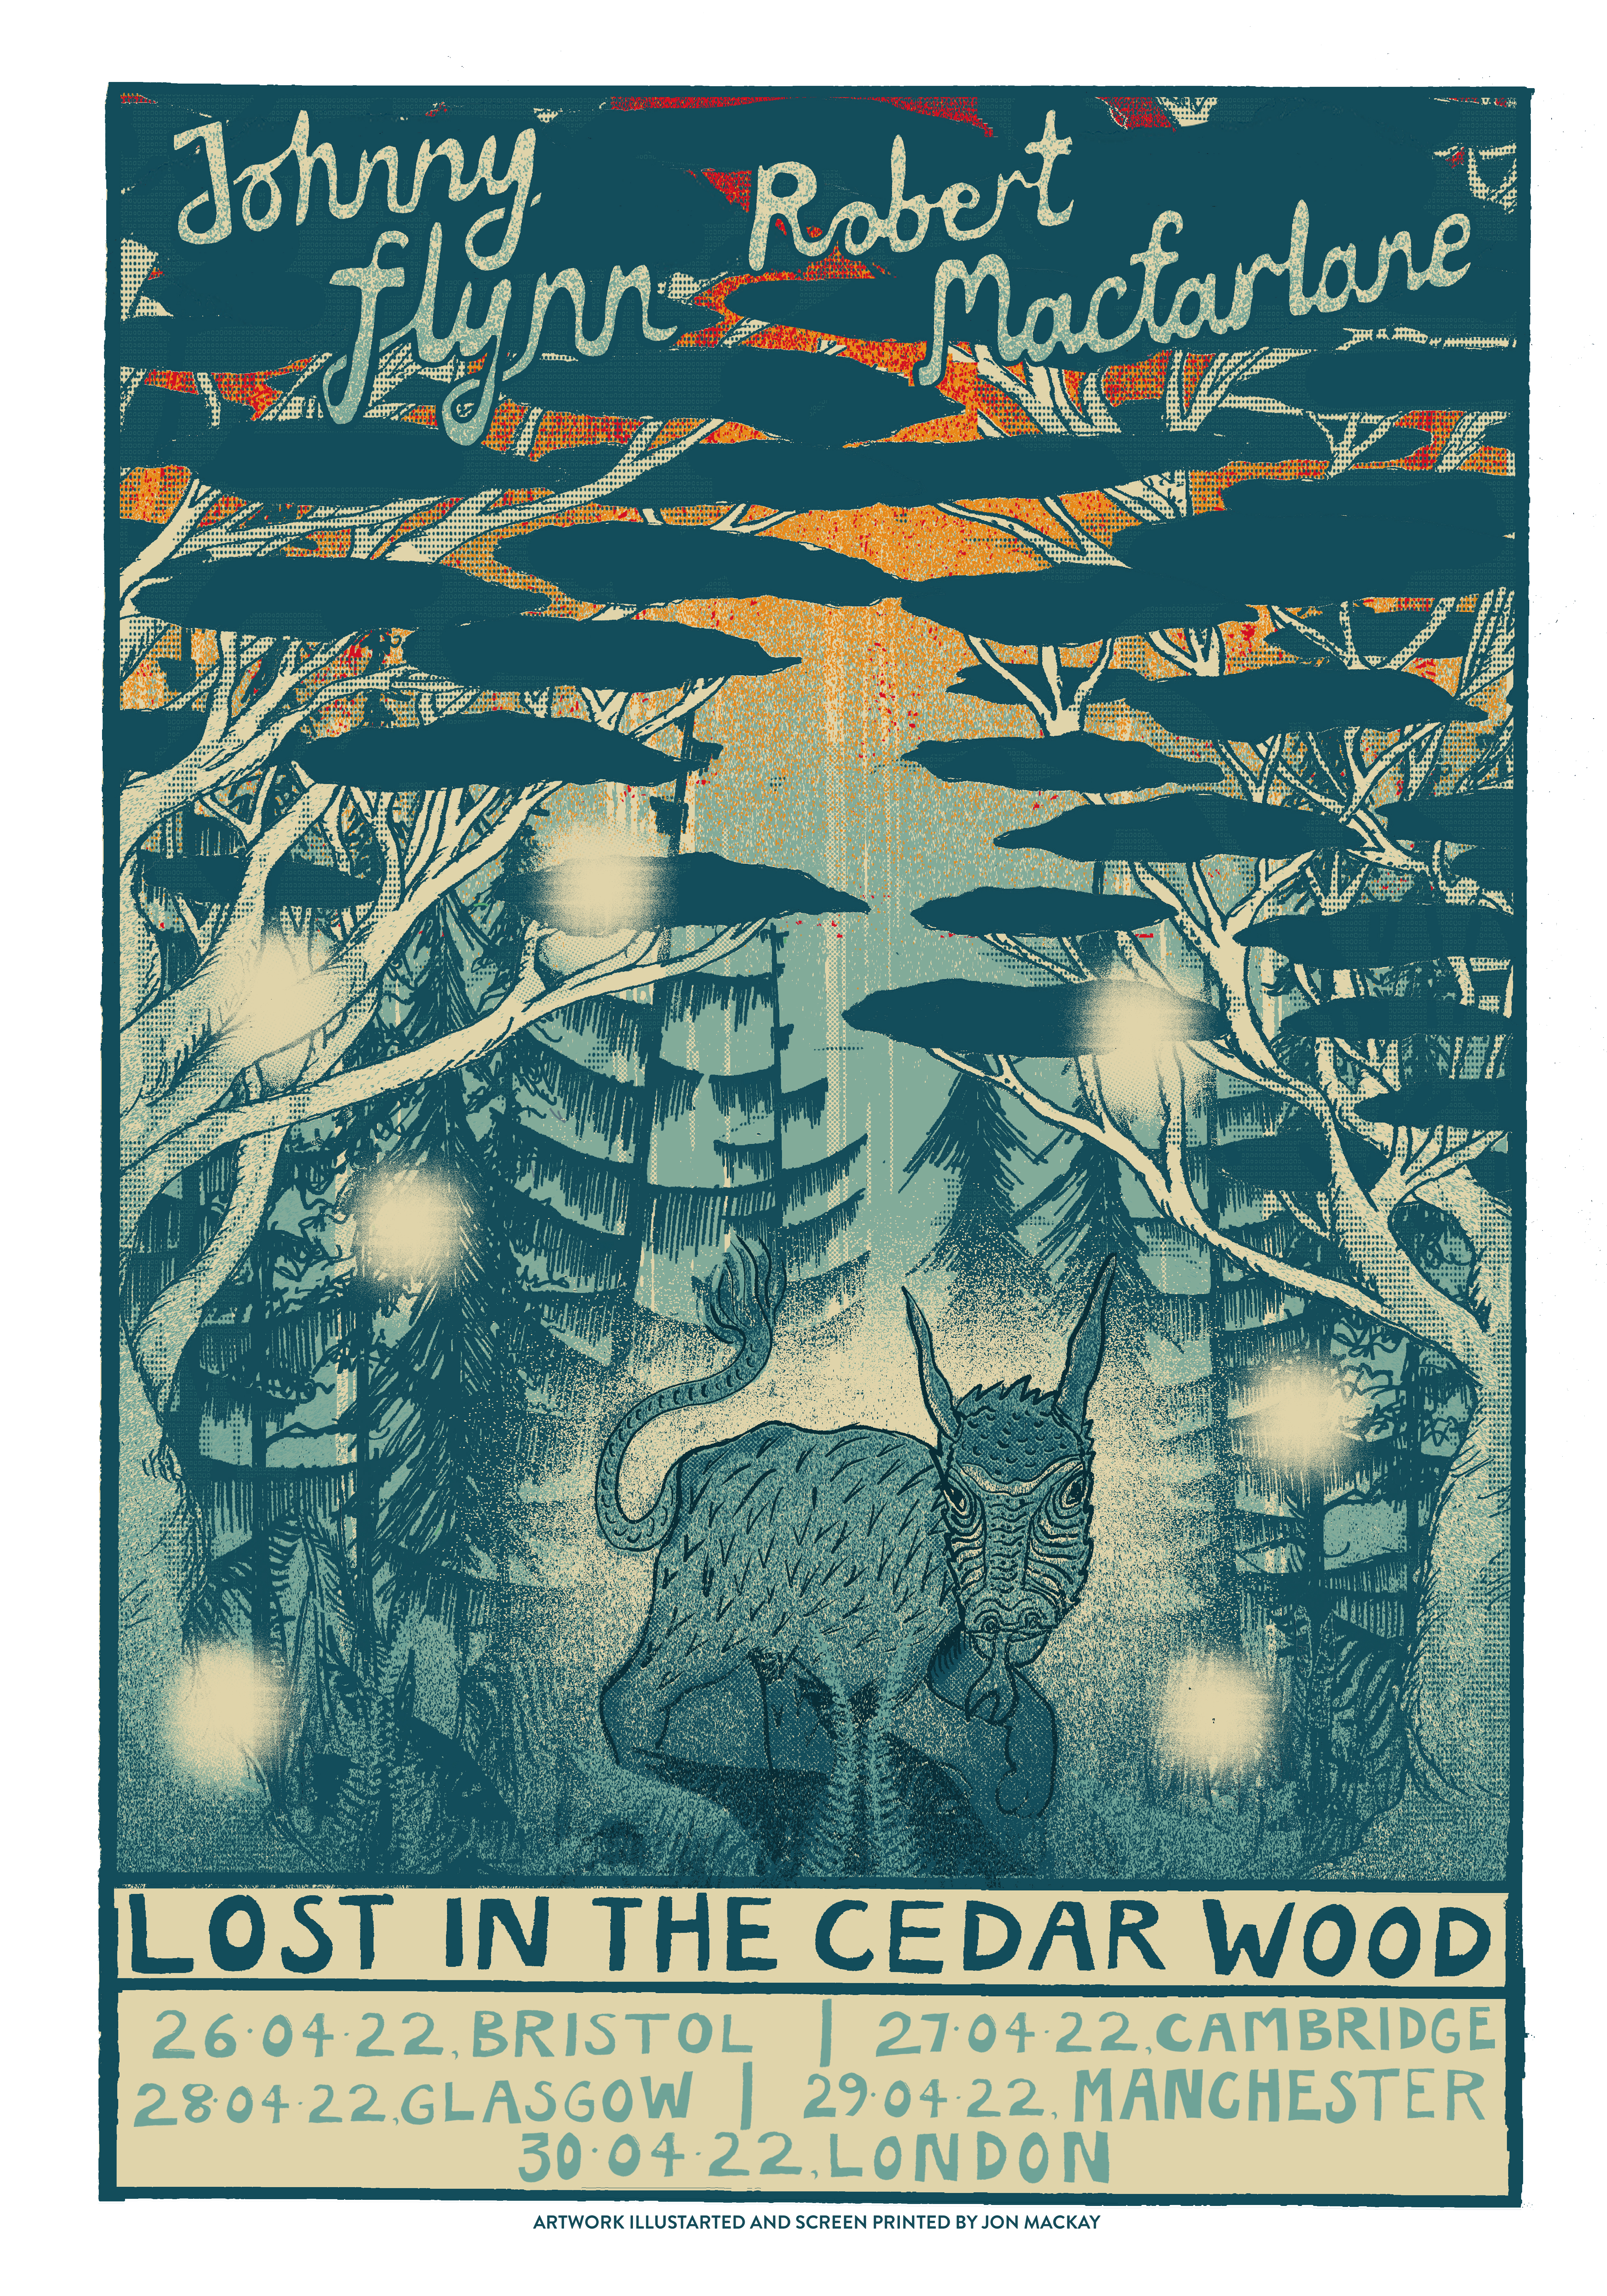 Johnny Flynn and Robert Macfarlane - Lost in the Cedar Wood Tour Poster - Johnny Flynn & The Sussex Wit (UK Merch)